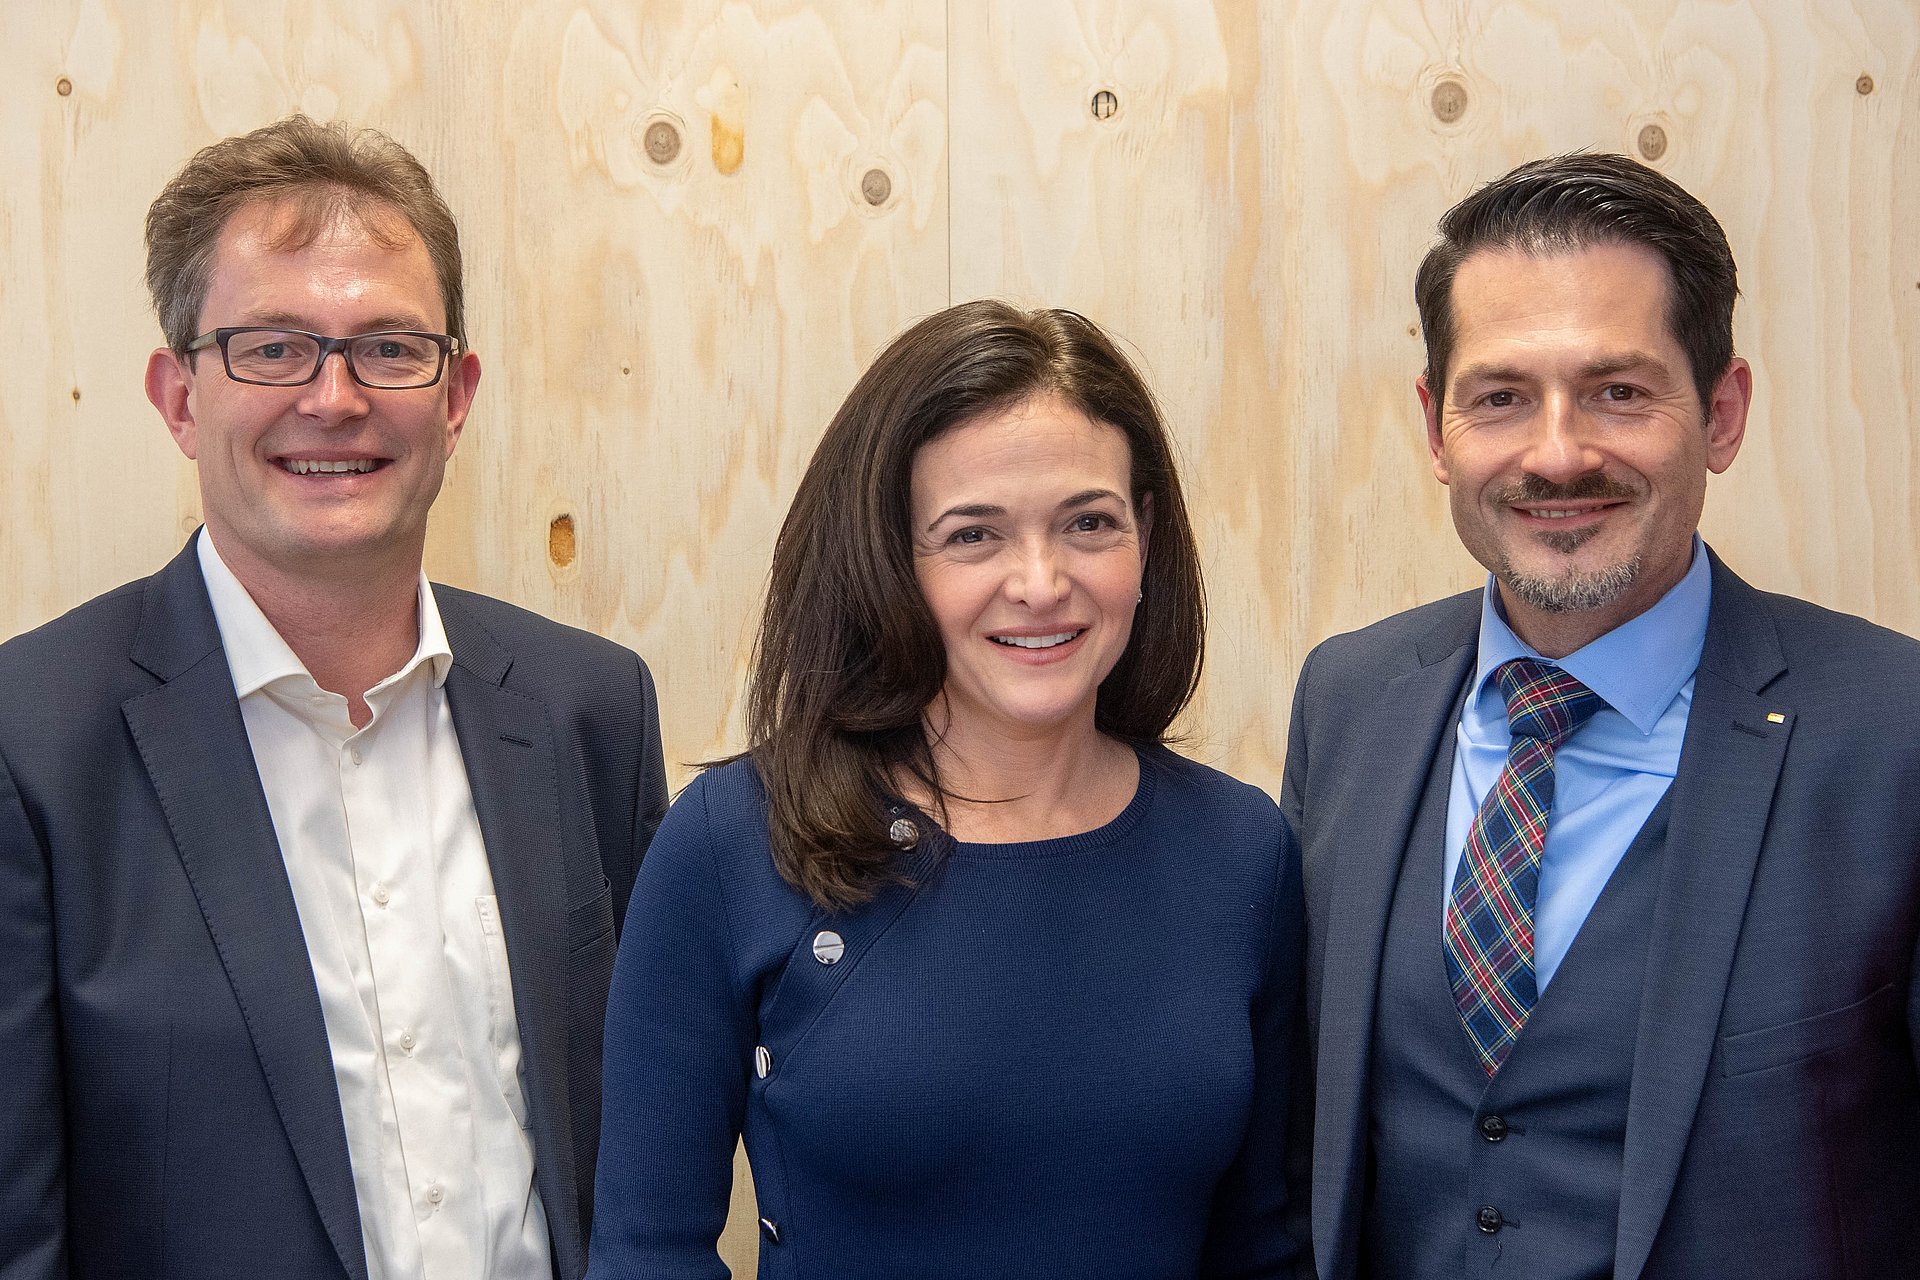 Facebook COO Sheryl Sandberg with TUM Vice President Prof. Thomas Hofmann and Project Coordinator Prof. Christoph Lütge at the "Digital-Life Design" conference. (Picture: Heddergott / TUM)